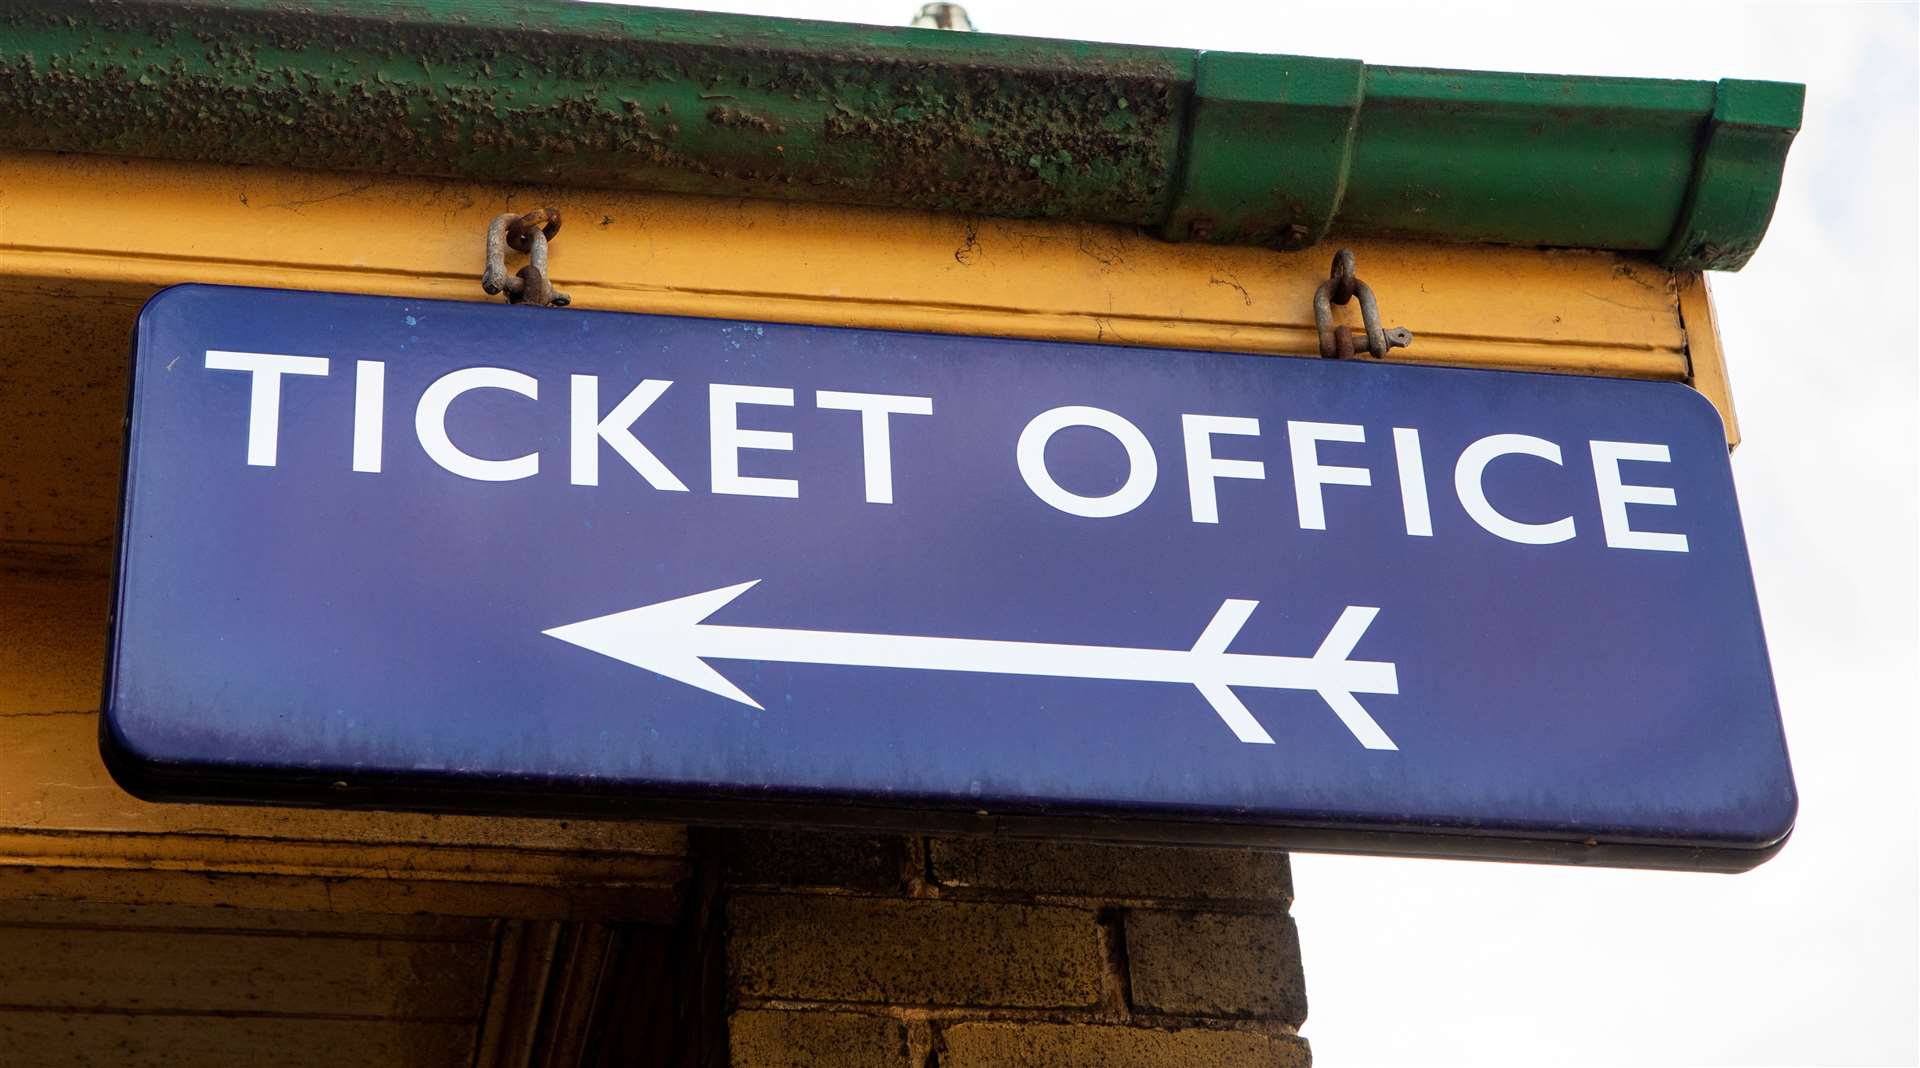 With ticket offices not staff around the clock, many still rely on machines. Image: iStock.